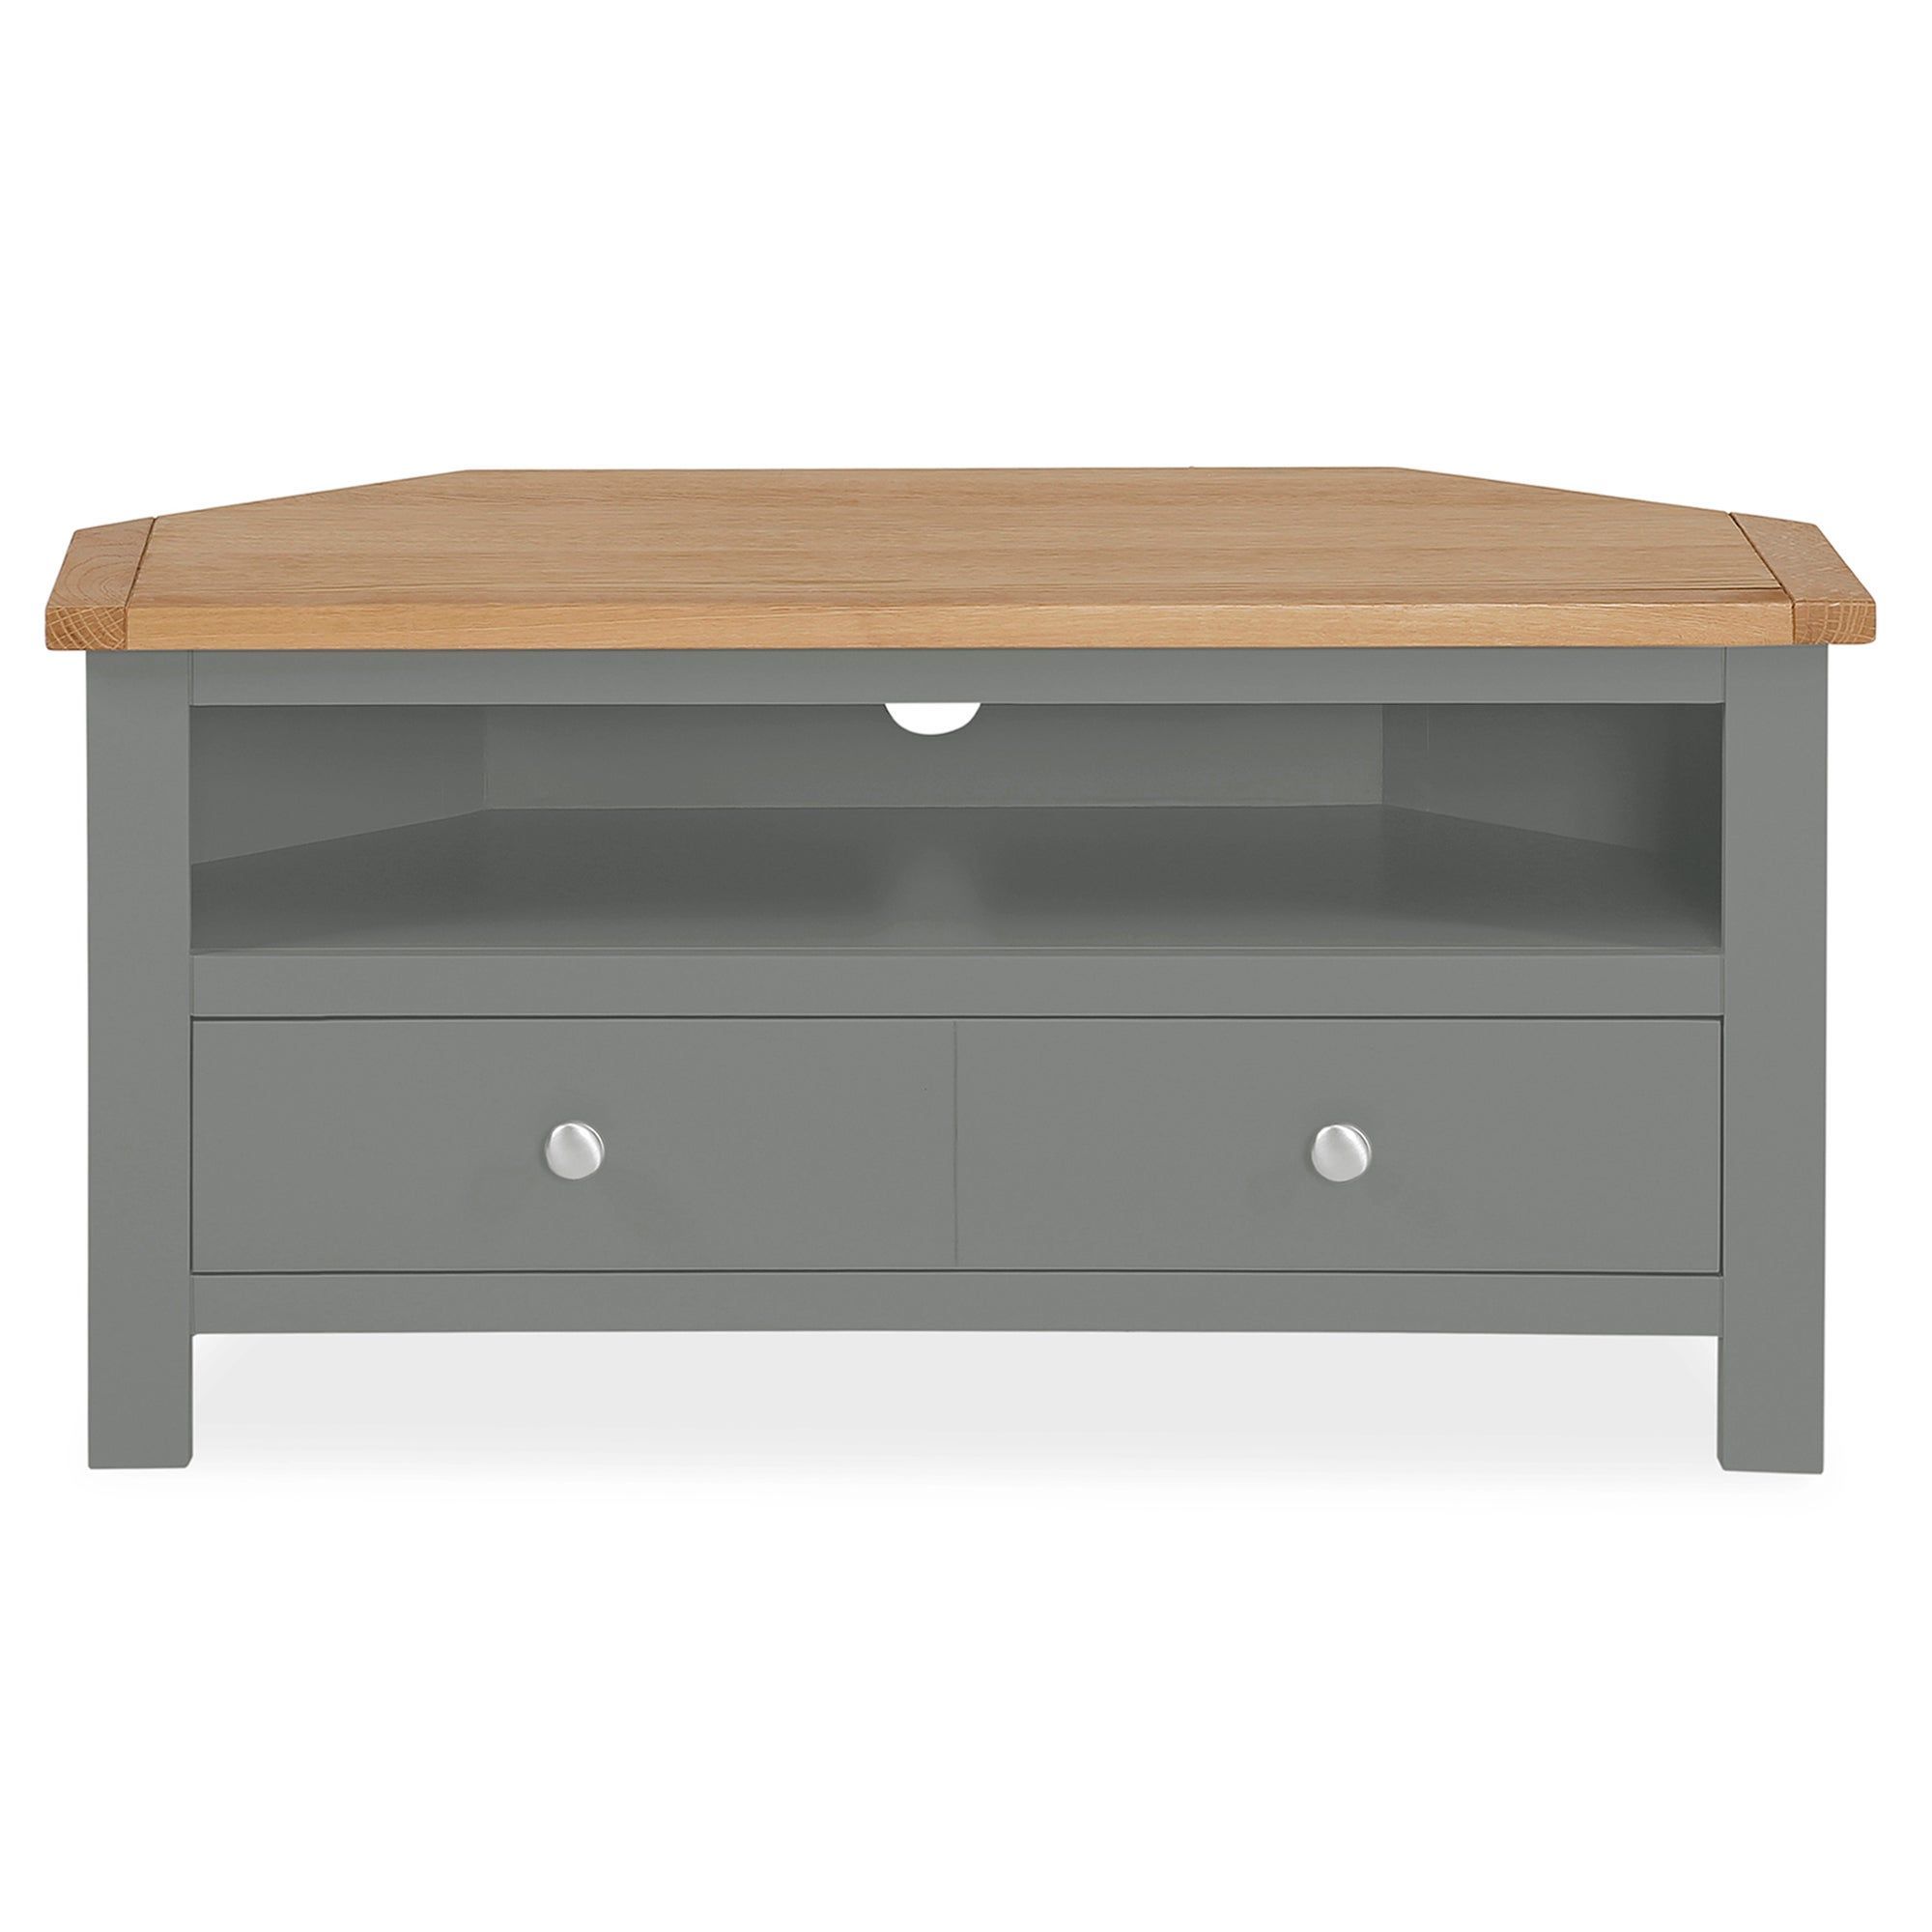 Bromley Slate Corner Tv Stand | Corner Tv Stand, Wooden Tv Throughout Bromley Slate Tv Stands (Photo 1 of 15)